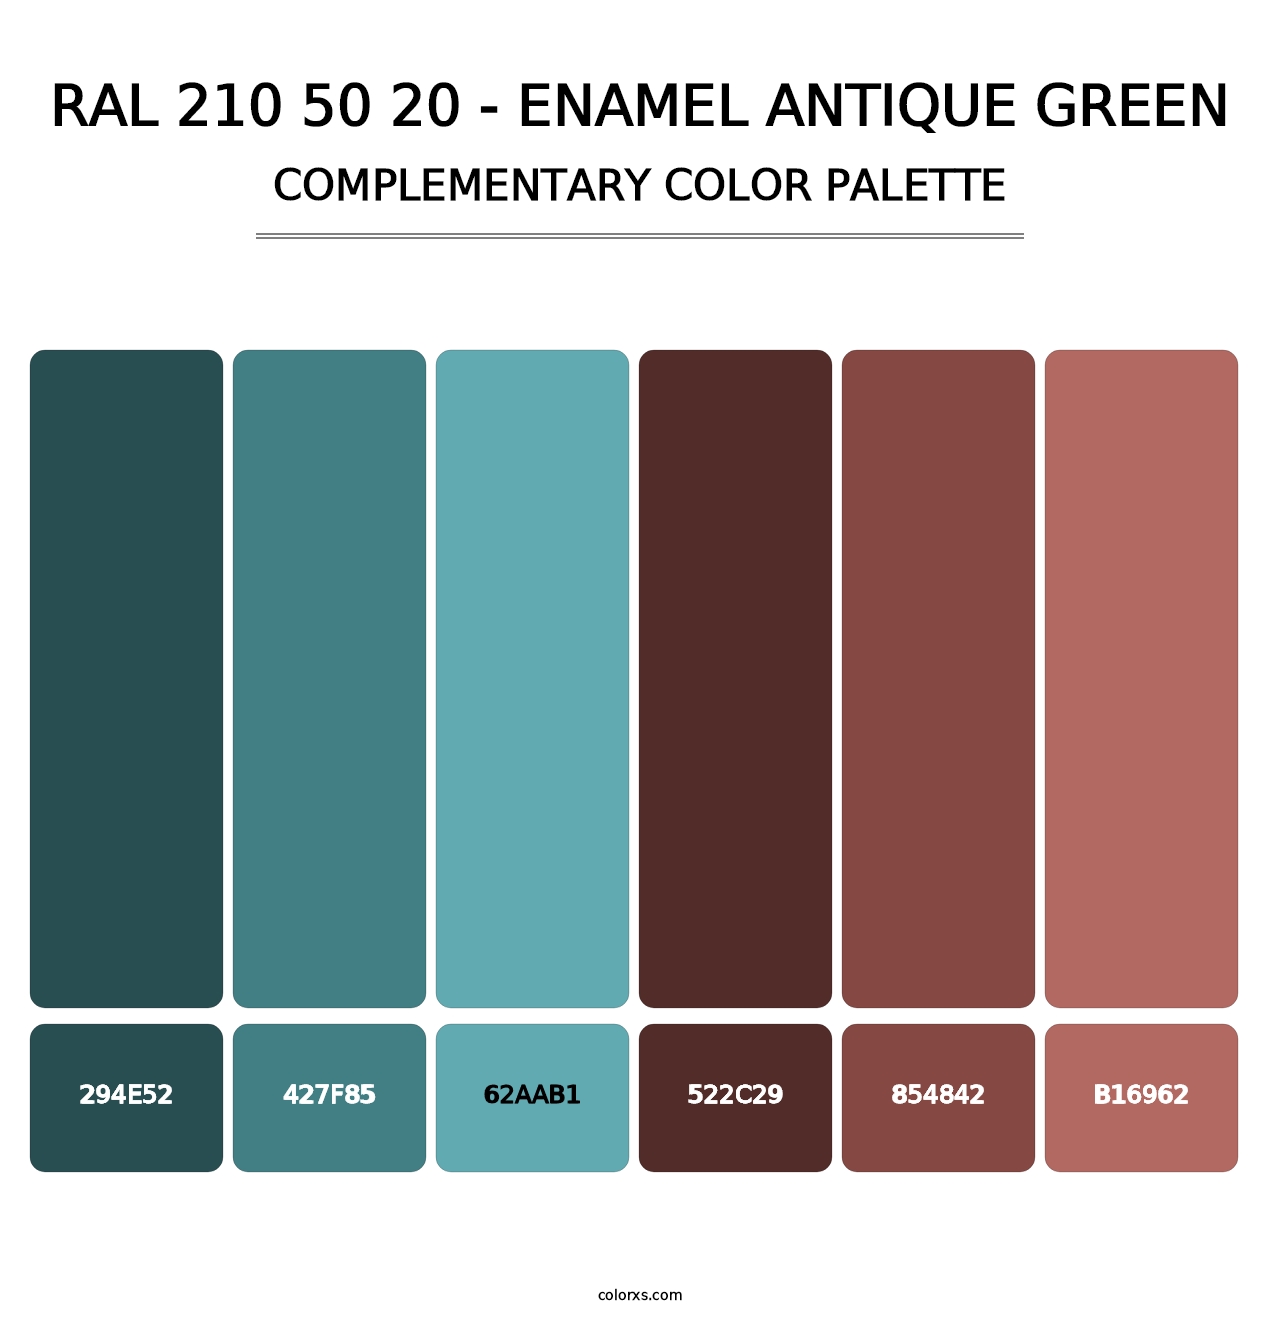 RAL 210 50 20 - Enamel Antique Green - Complementary Color Palette